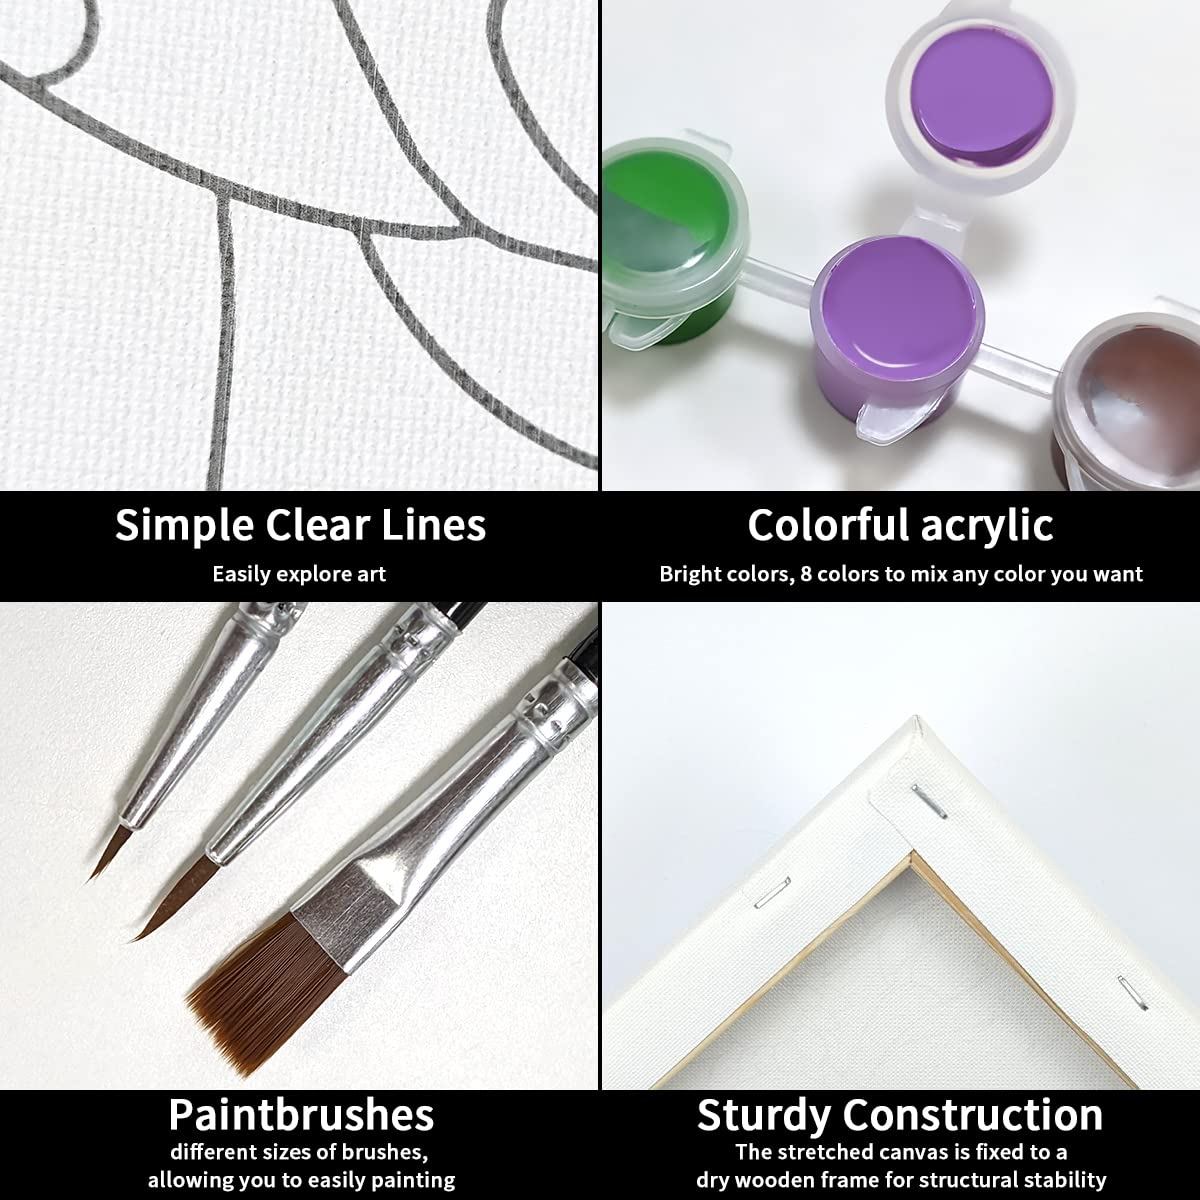 Chic Girl Paint Party Kits Pre Drawn Canvas Paint and Sip for Adults